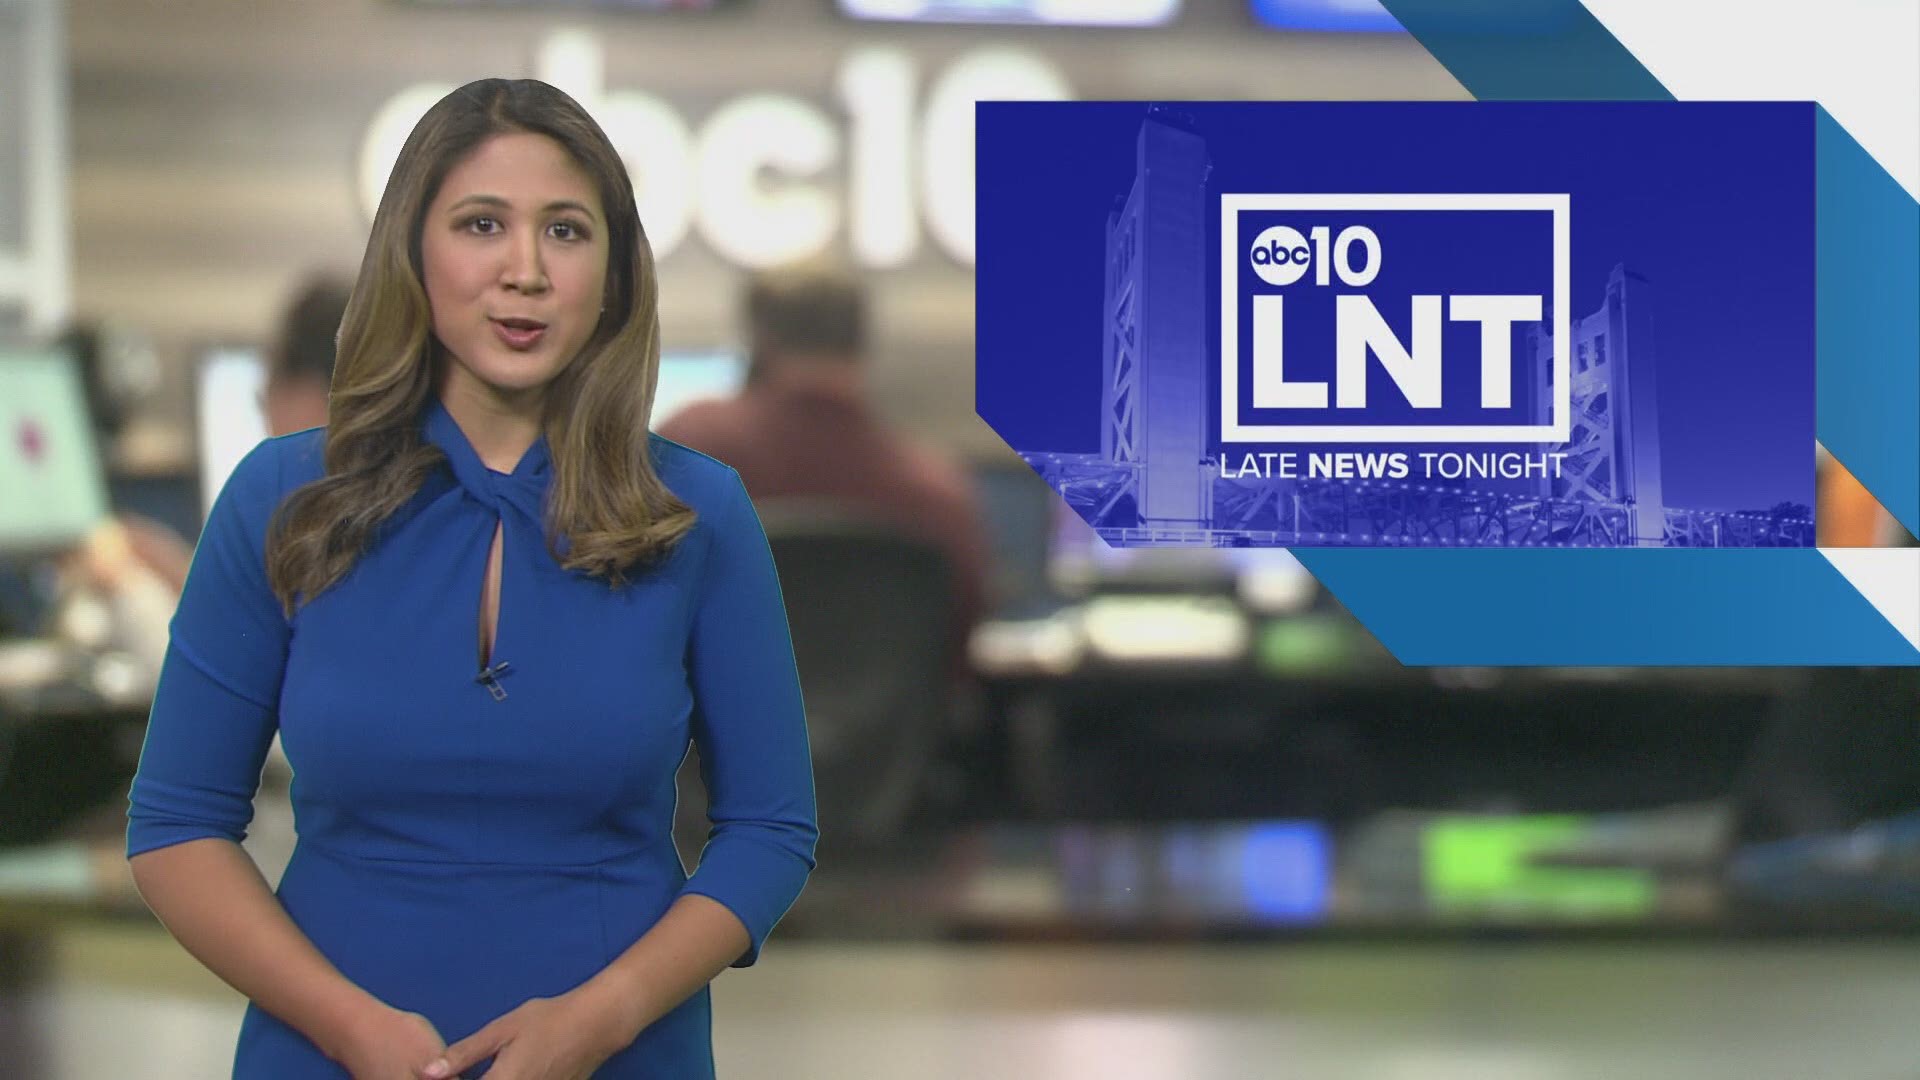 Evening Headlines: August 4, 2019 | Catch in-depth reporting on #LateNewsTonight at 11 p.m. | The latest Sacramento news is always at www.abc10.com